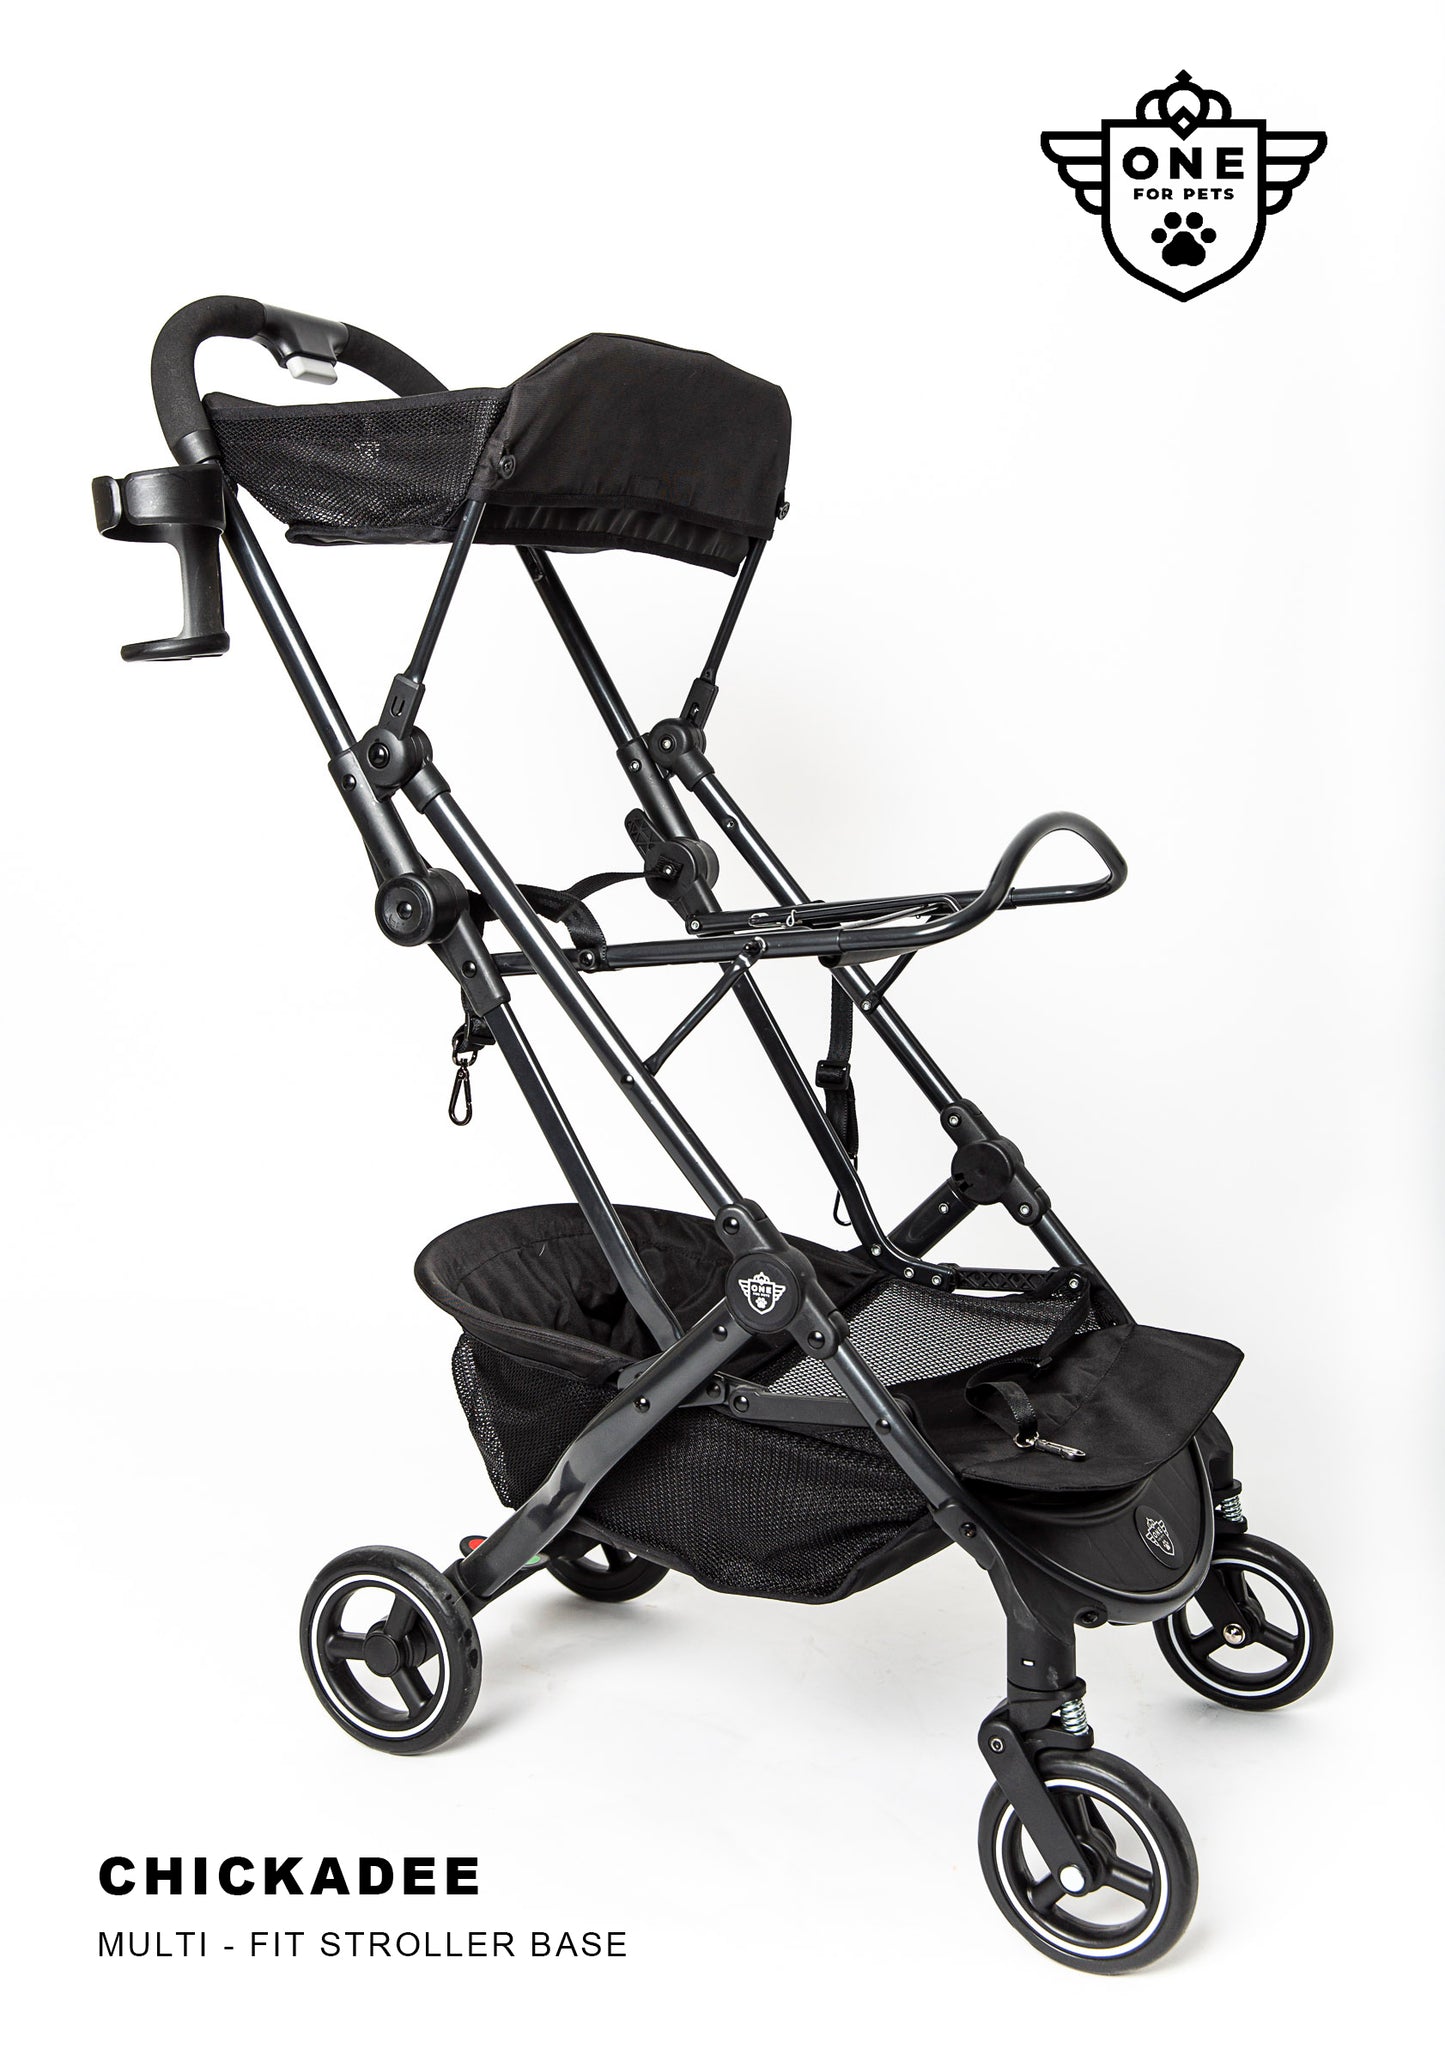 One for Pets Chickadee Multi-Fit Stroller Base